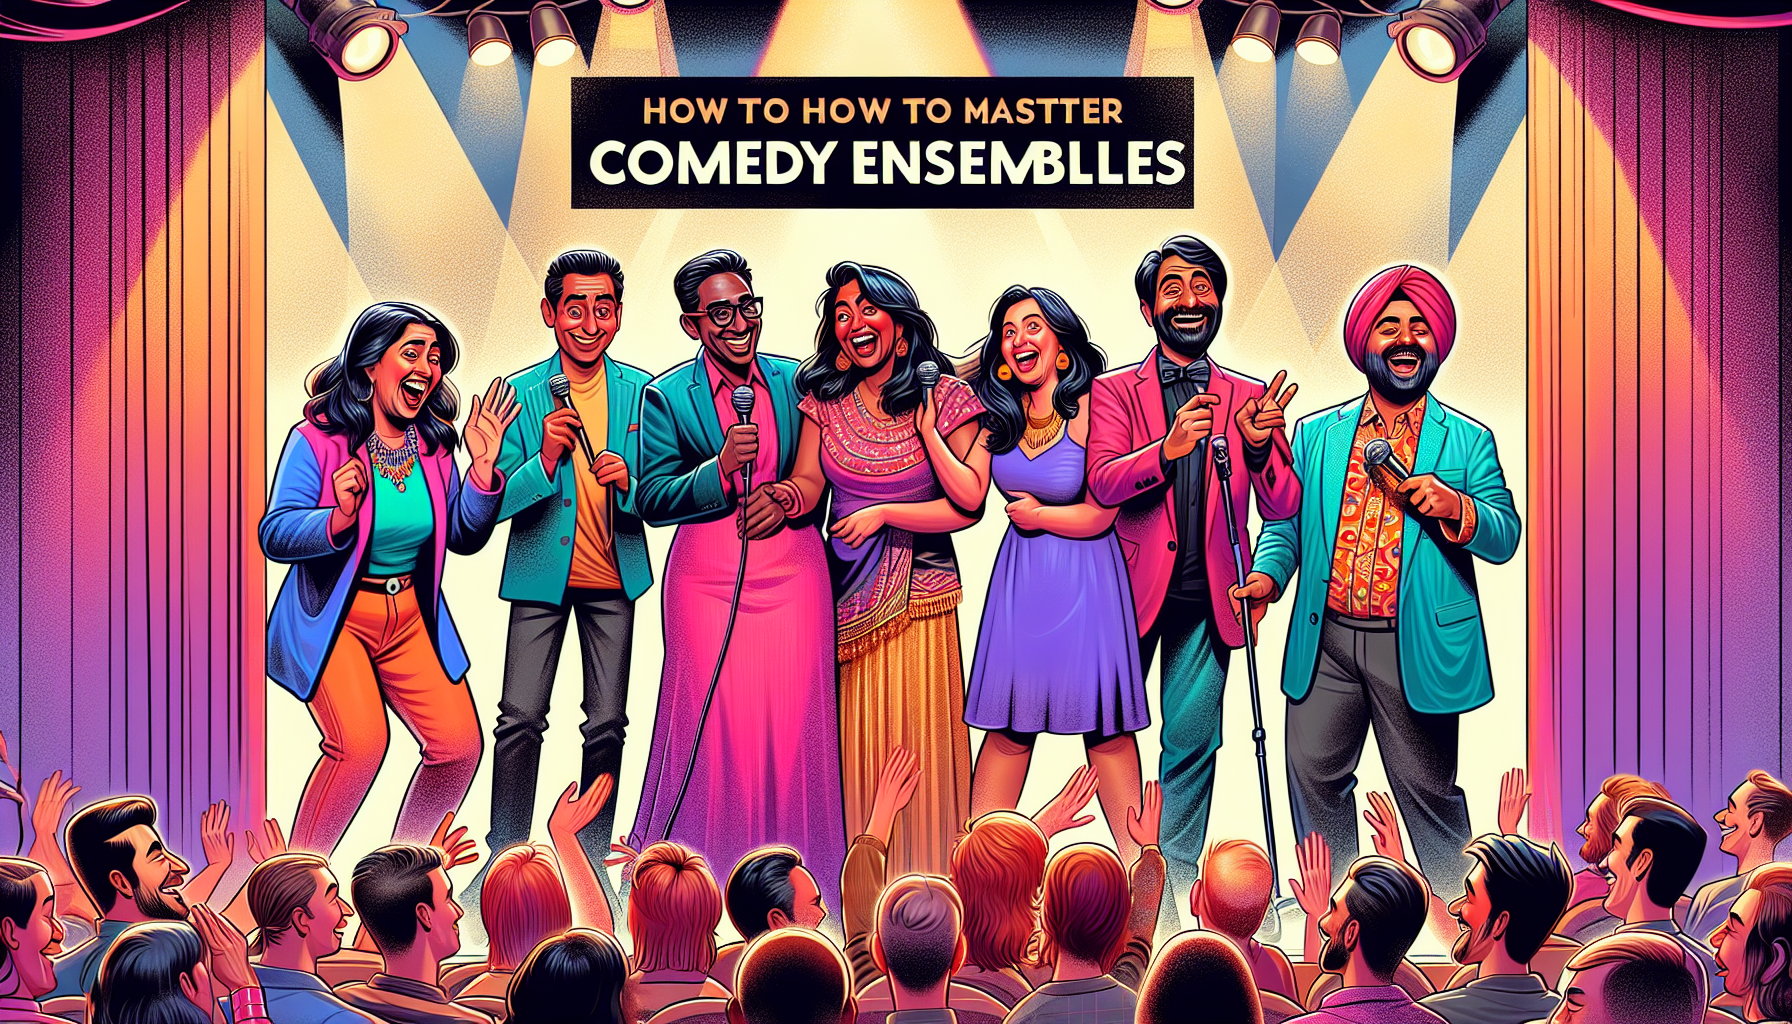 An illustration exemplifying how to master comedy ensembles and create vibrant character dynamics. The image features a diverse group of comedic performers on stage, with detailed expressions and body language that evoke humor and camaraderie. Include a South Asian woman, a Hispanic man, a Black woman, and a Middle Eastern man. The style should be modern, with bright colors, dynamic lines, and a lively stage setup with spotlights, microphones, and an enthusiastic audience. Please refrain from using text within the image.